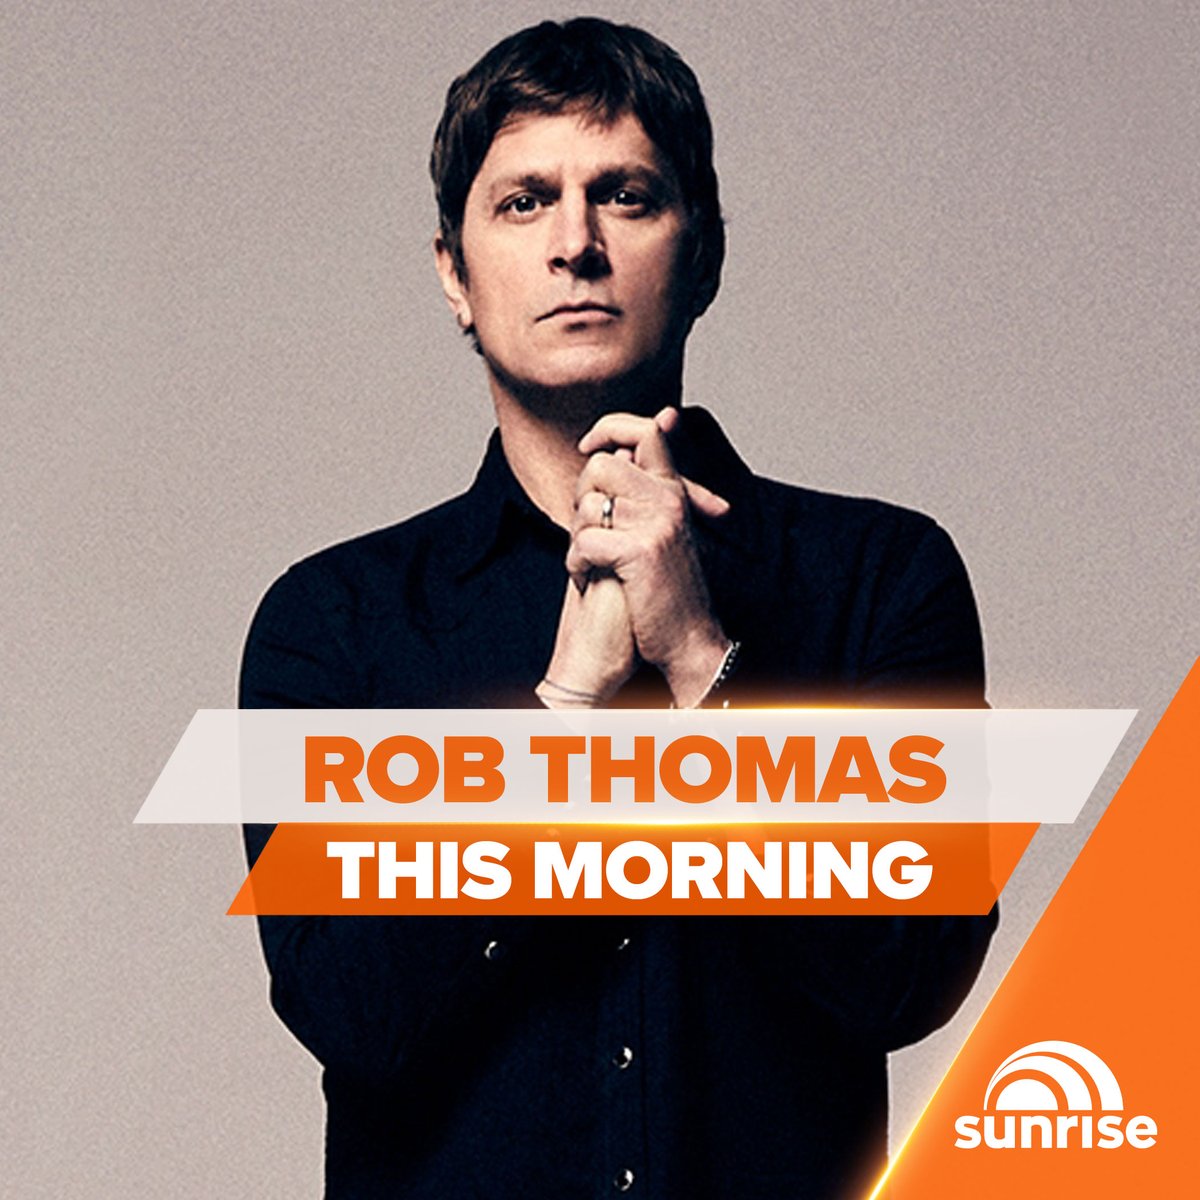 Coming up on Sunrise, @MatchboxTwenty superstar singer Rob Thomas joins us as the band celebrate their new album - #WhereTheLightGoes @ThisIsRobThomas #matchboxtwenty #matchbox20
Don't miss him this morning on @Channel7 and @7plus.